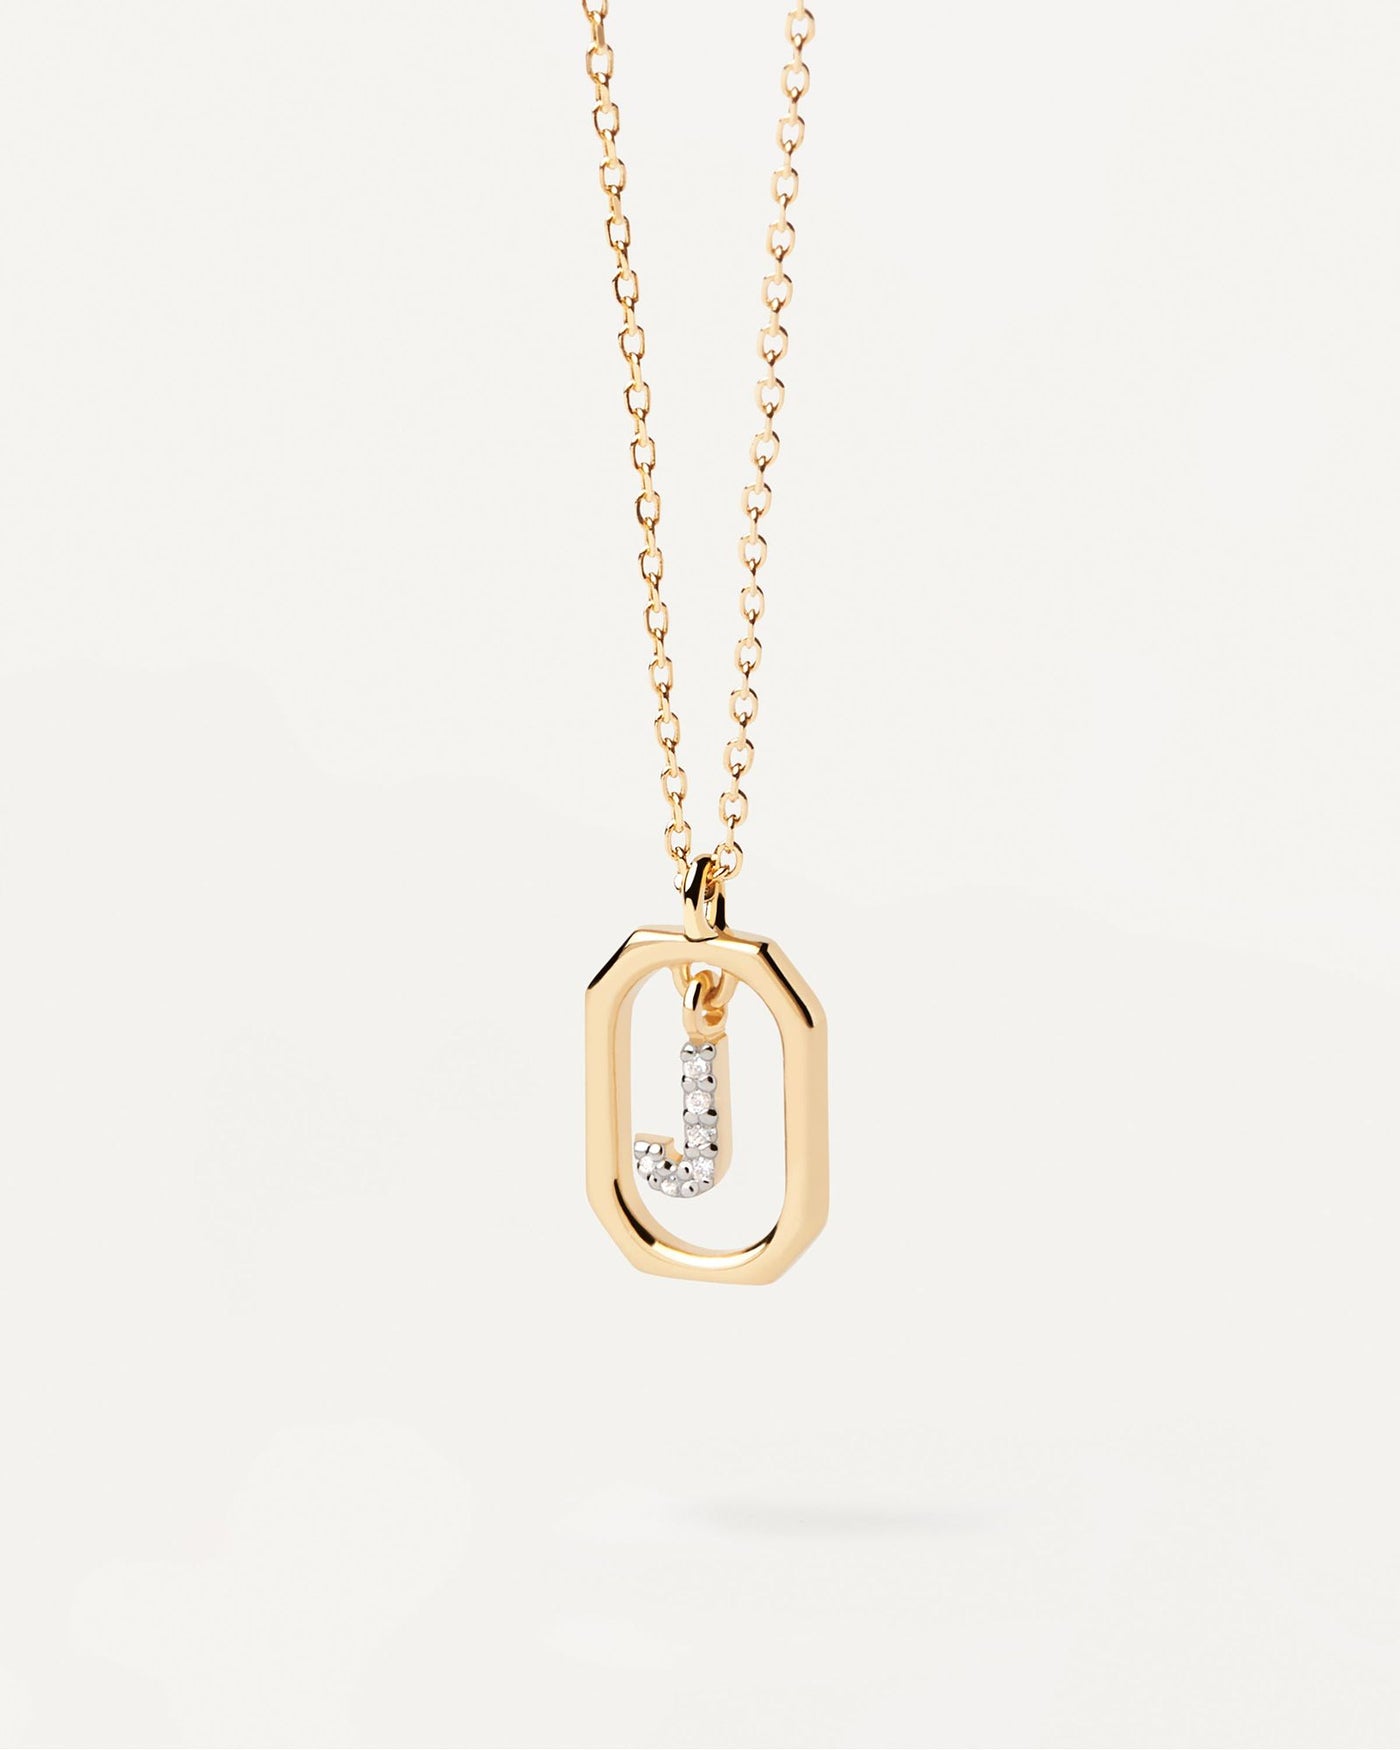 2024 Selection | Mini Letter J Necklace. Small initial J necklace in zirconia inside gold-plated silver octagonal pendant. Get the latest arrival from PDPAOLA. Place your order safely and get this Best Seller. Free Shipping.